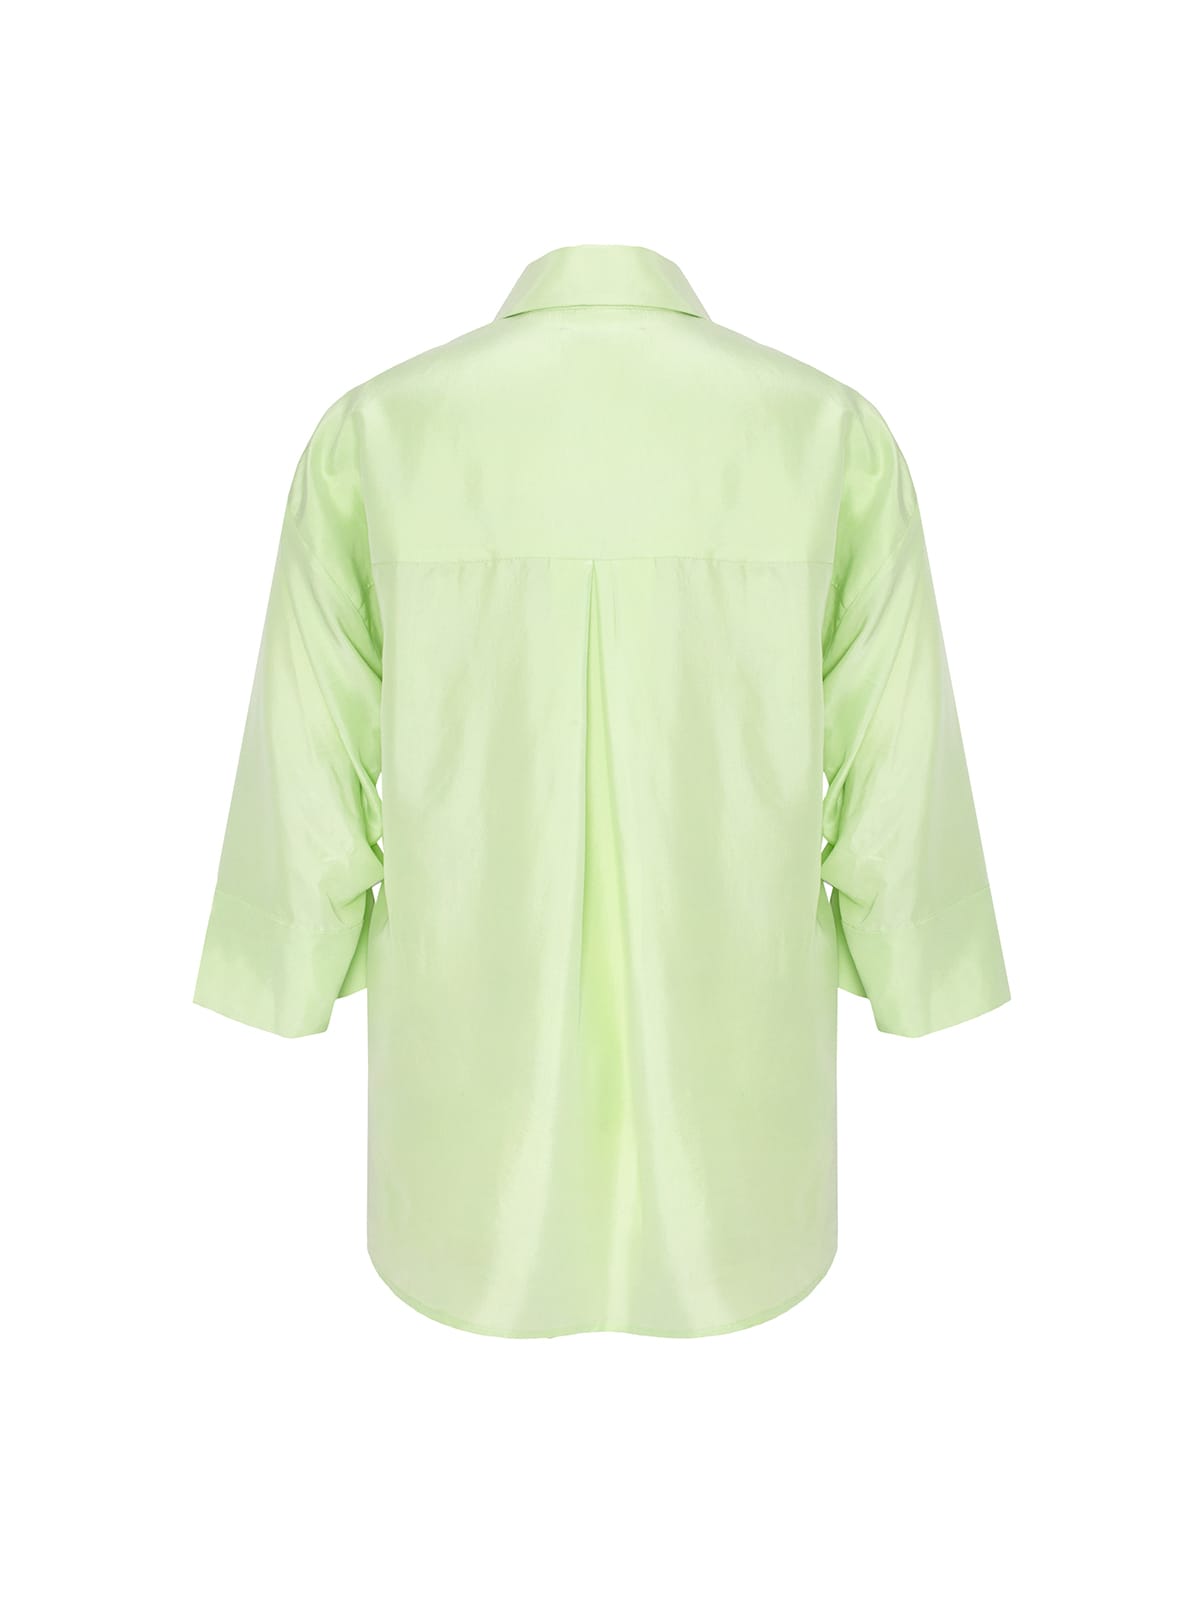 Cacti Green Silk Shirt - DILIGENT Clothes Official Site / Poland ...